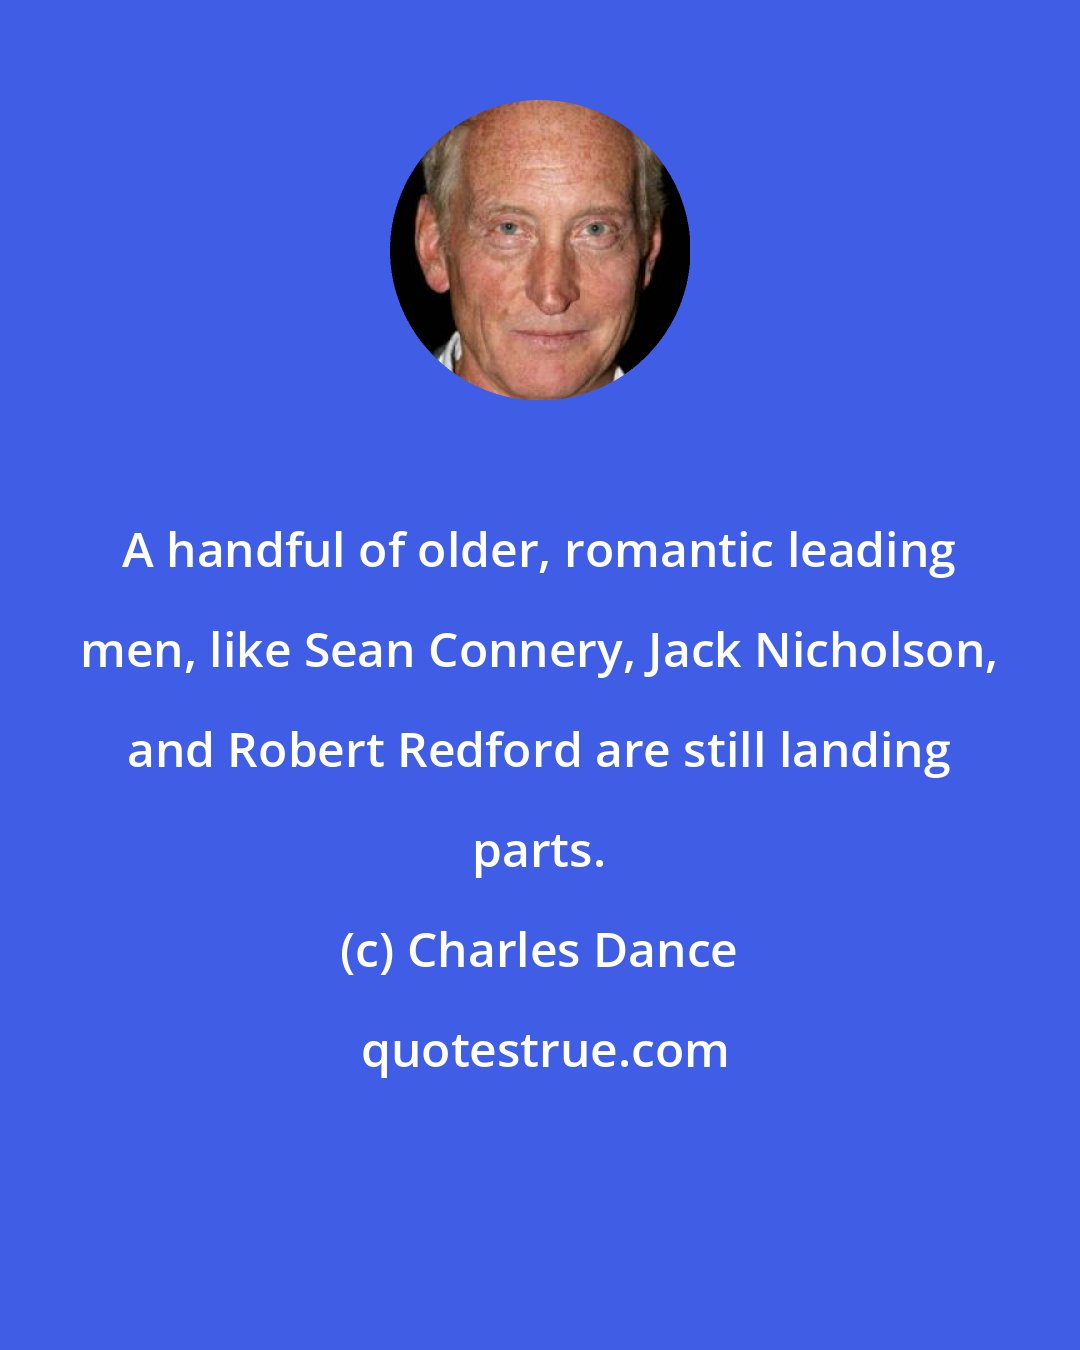 Charles Dance: A handful of older, romantic leading men, like Sean Connery, Jack Nicholson, and Robert Redford are still landing parts.